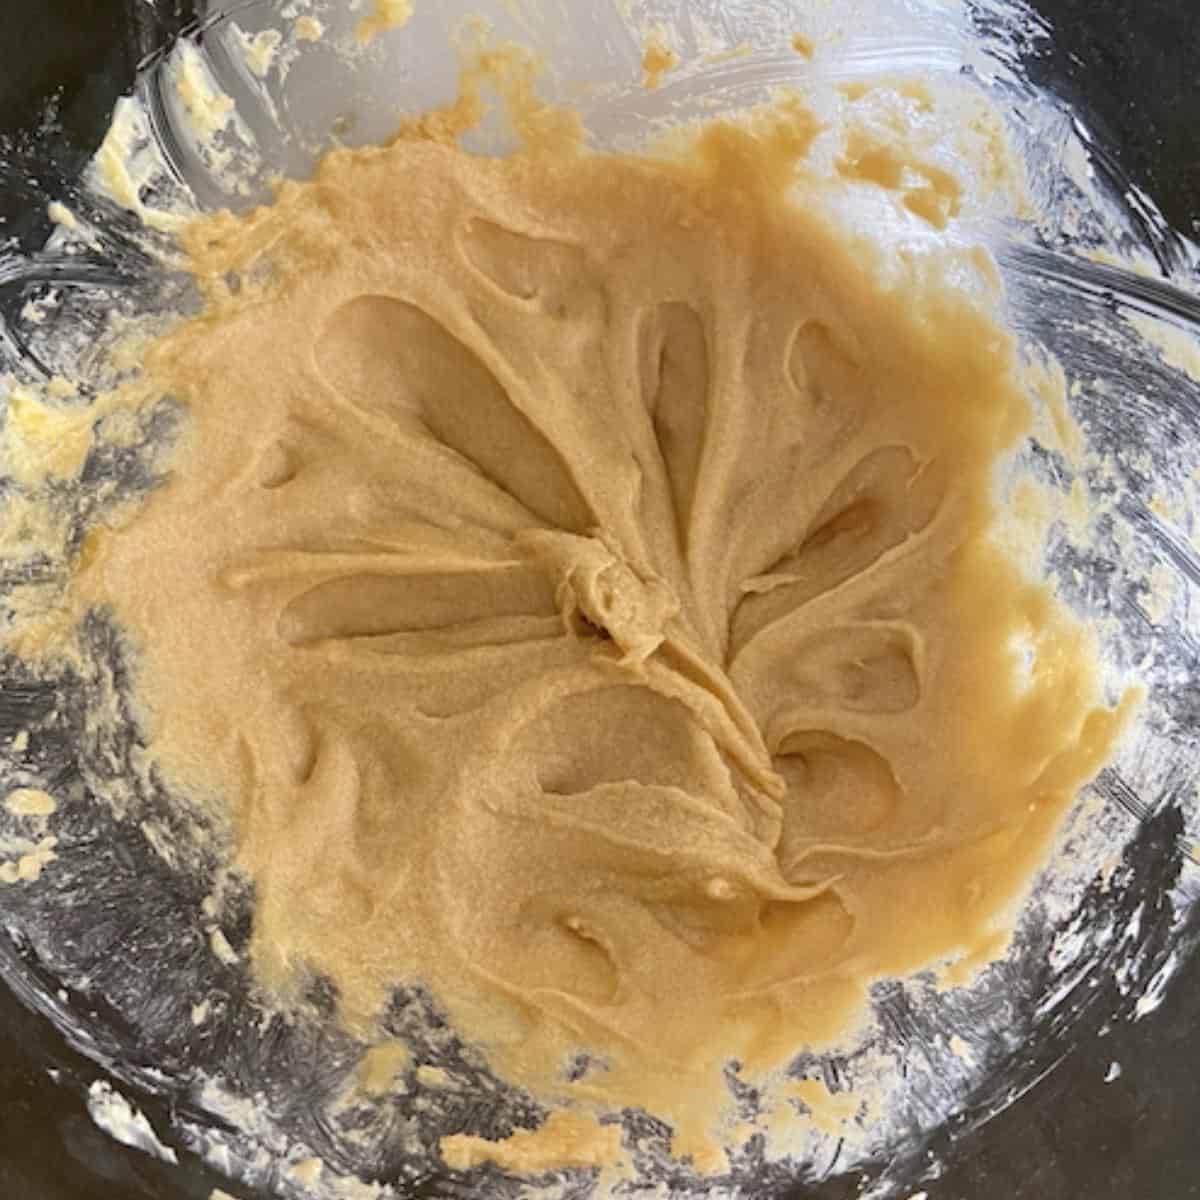 wet ingredients blended together in stand mixer bowl